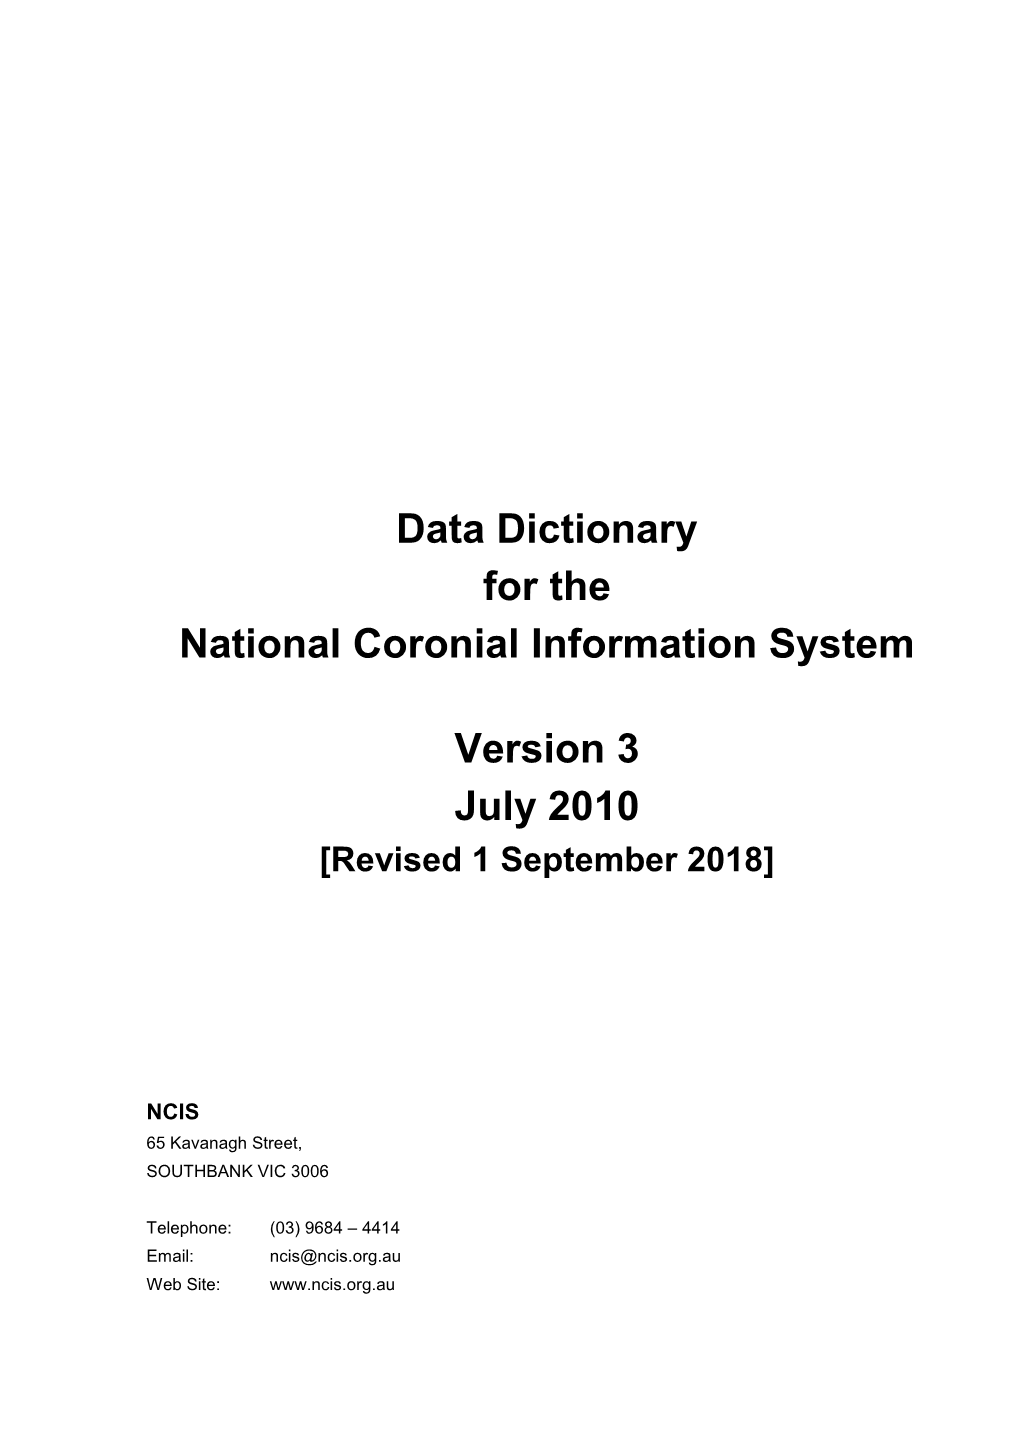 Data Dictionary for the National Coronial Information System